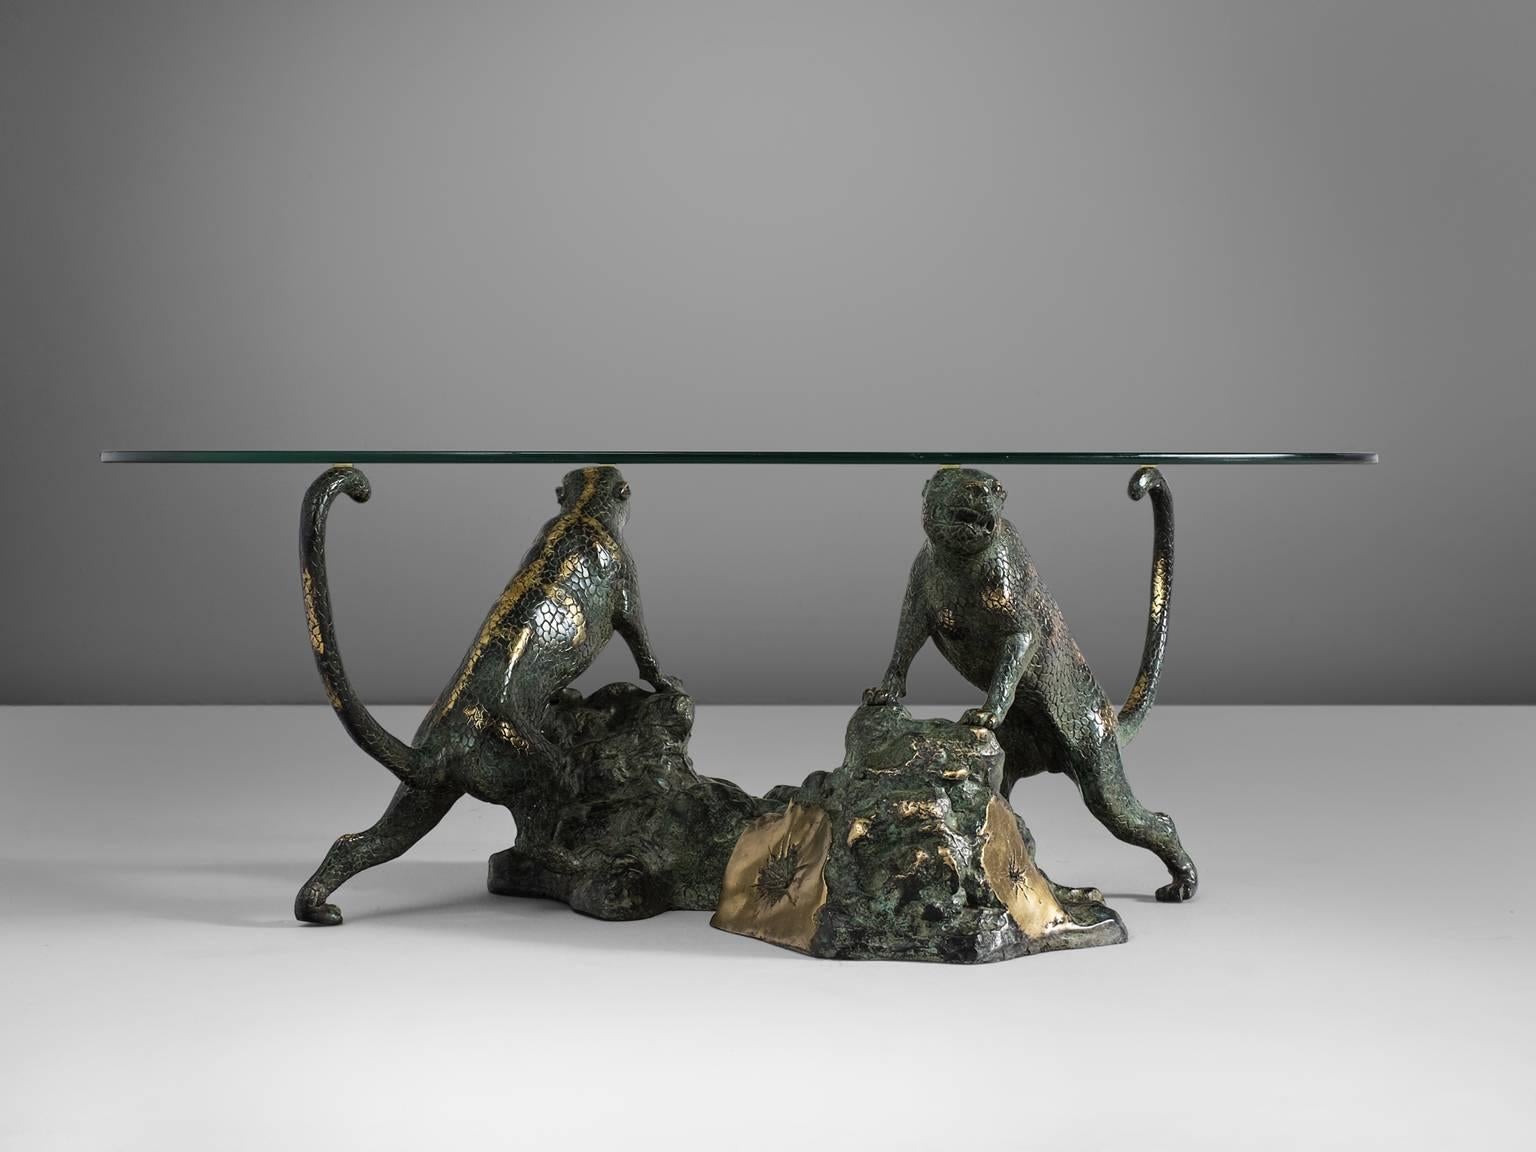 Coffee table, cast bronze panthers and glass, Belgium, 1960s.

This highly rare cocktail table shows two beautifully detailed small panthers, standing upwards against a rock. The table has a very strong appearance, the position of the two animals